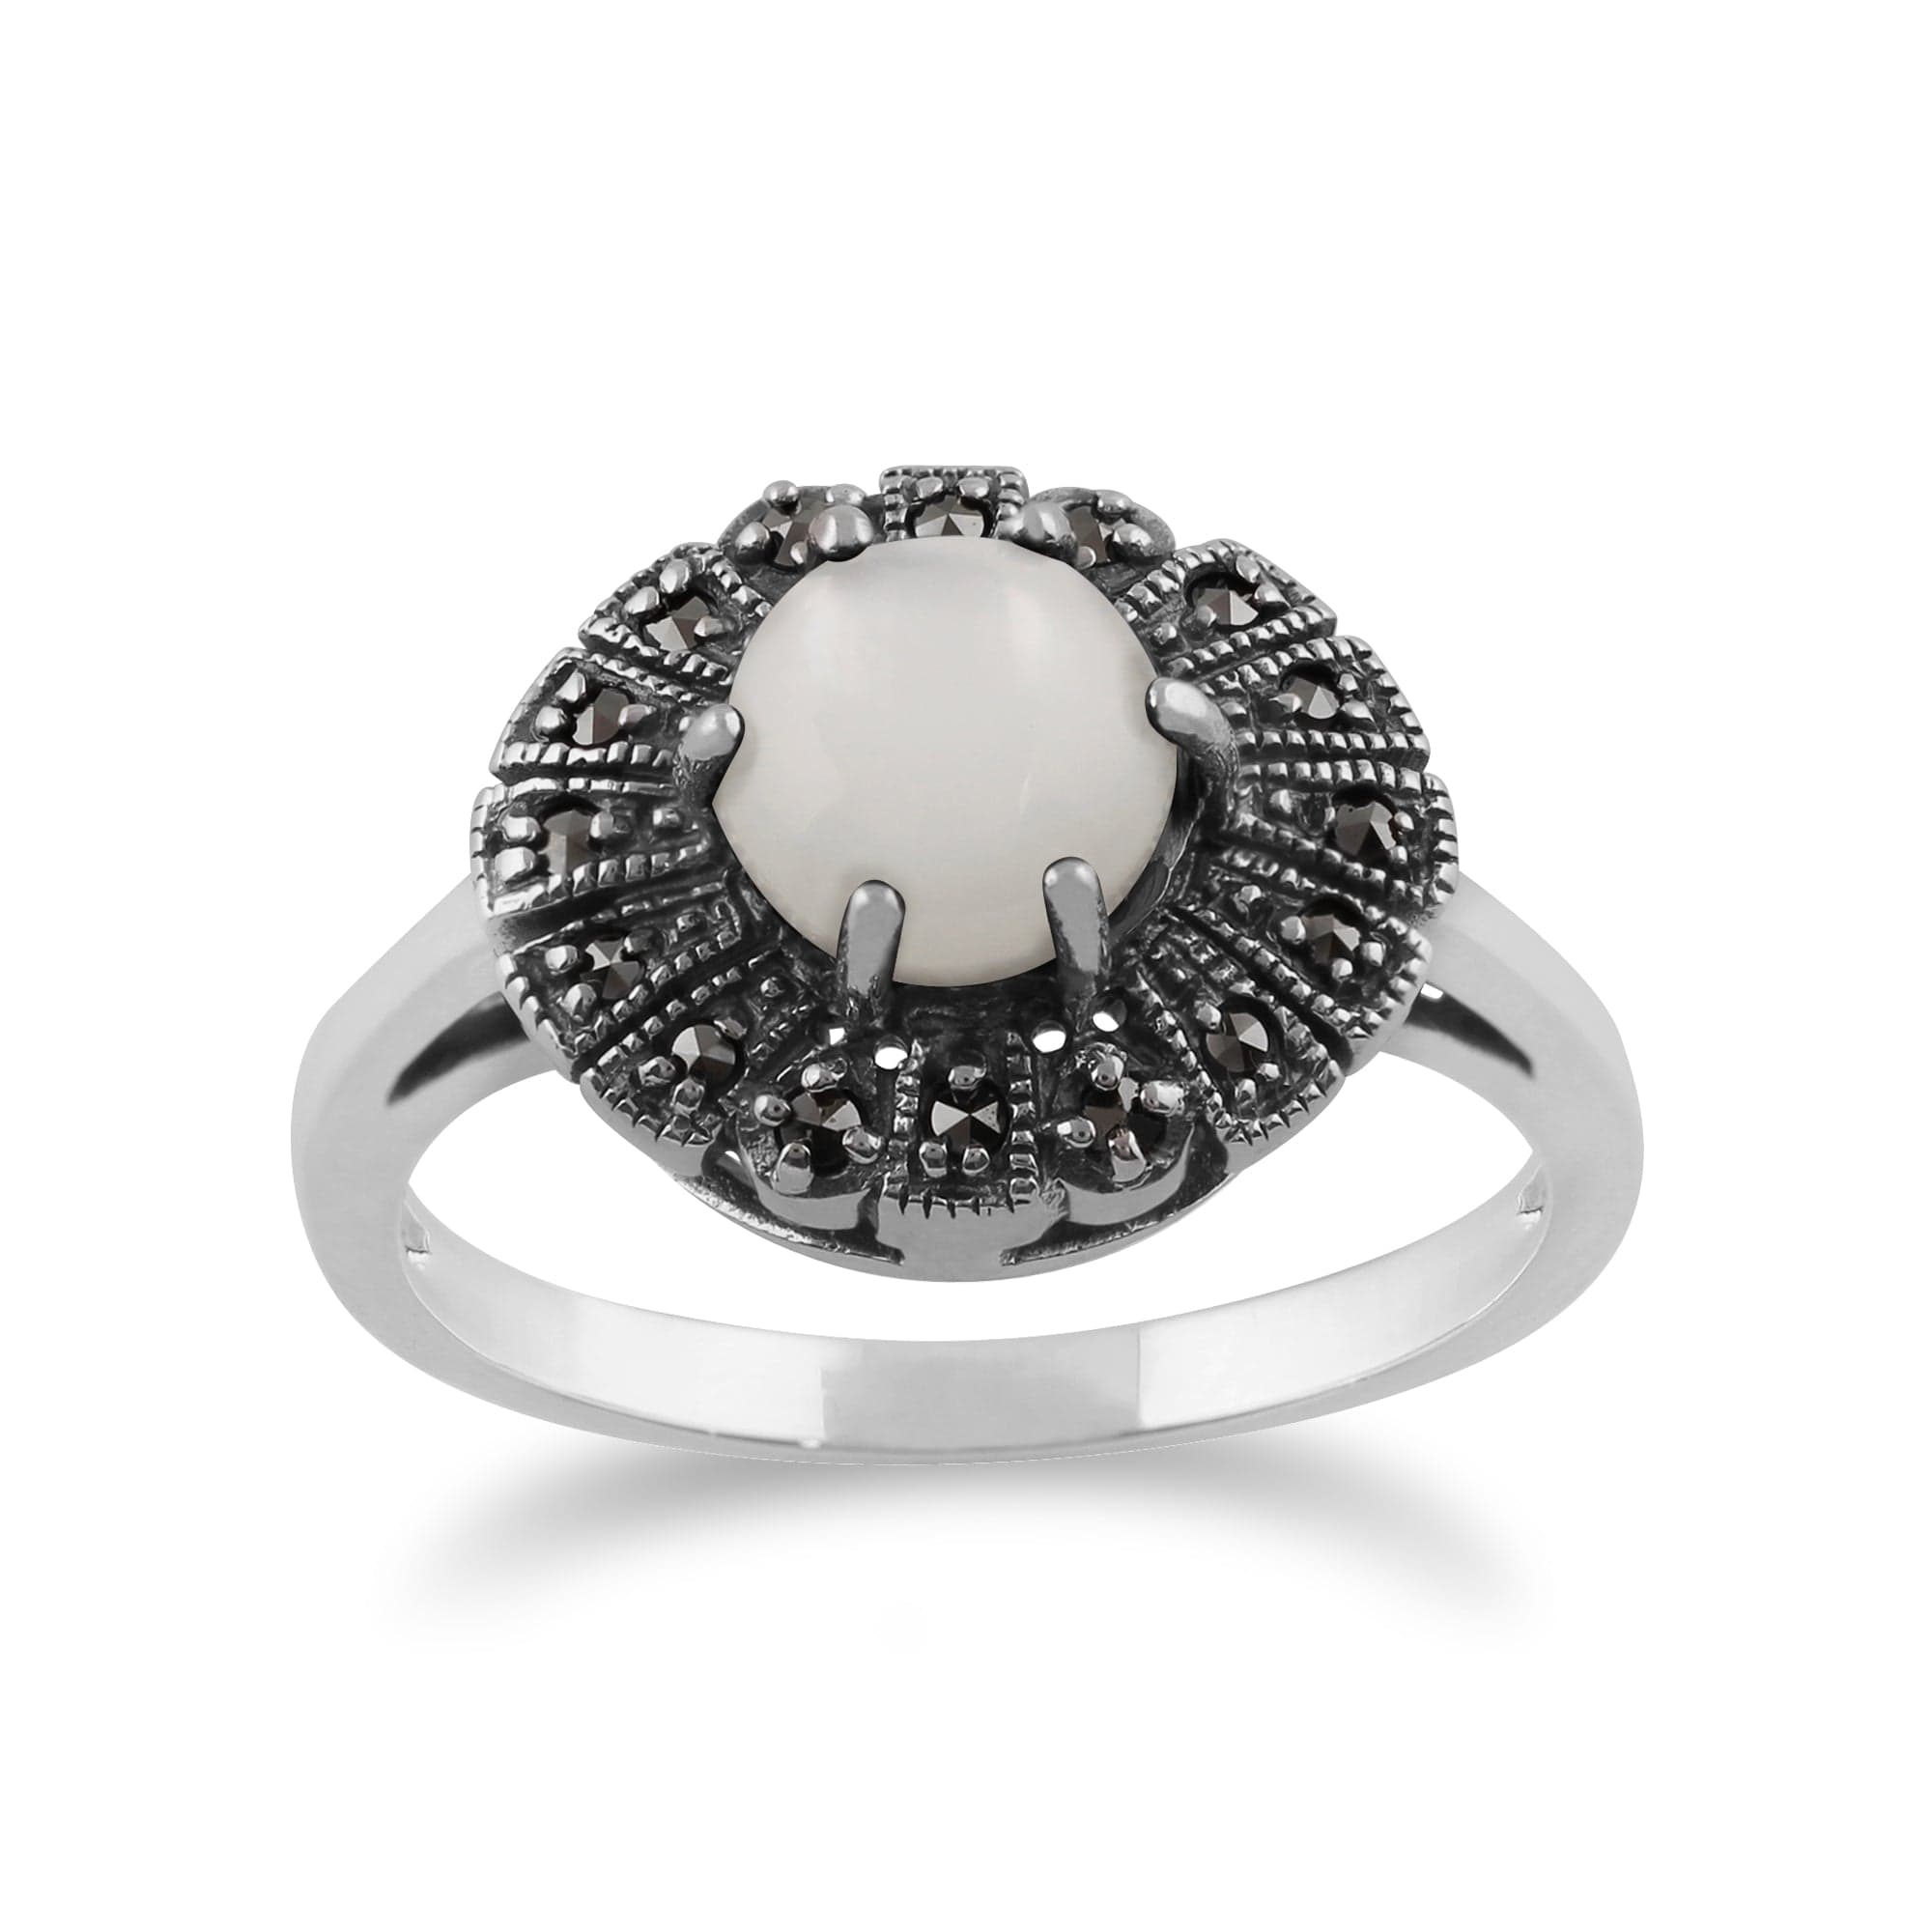 Gemondo 925 Sterling Silver 0.85ct Mother of Pearl & Marcasite Art Deco Ring Image 1